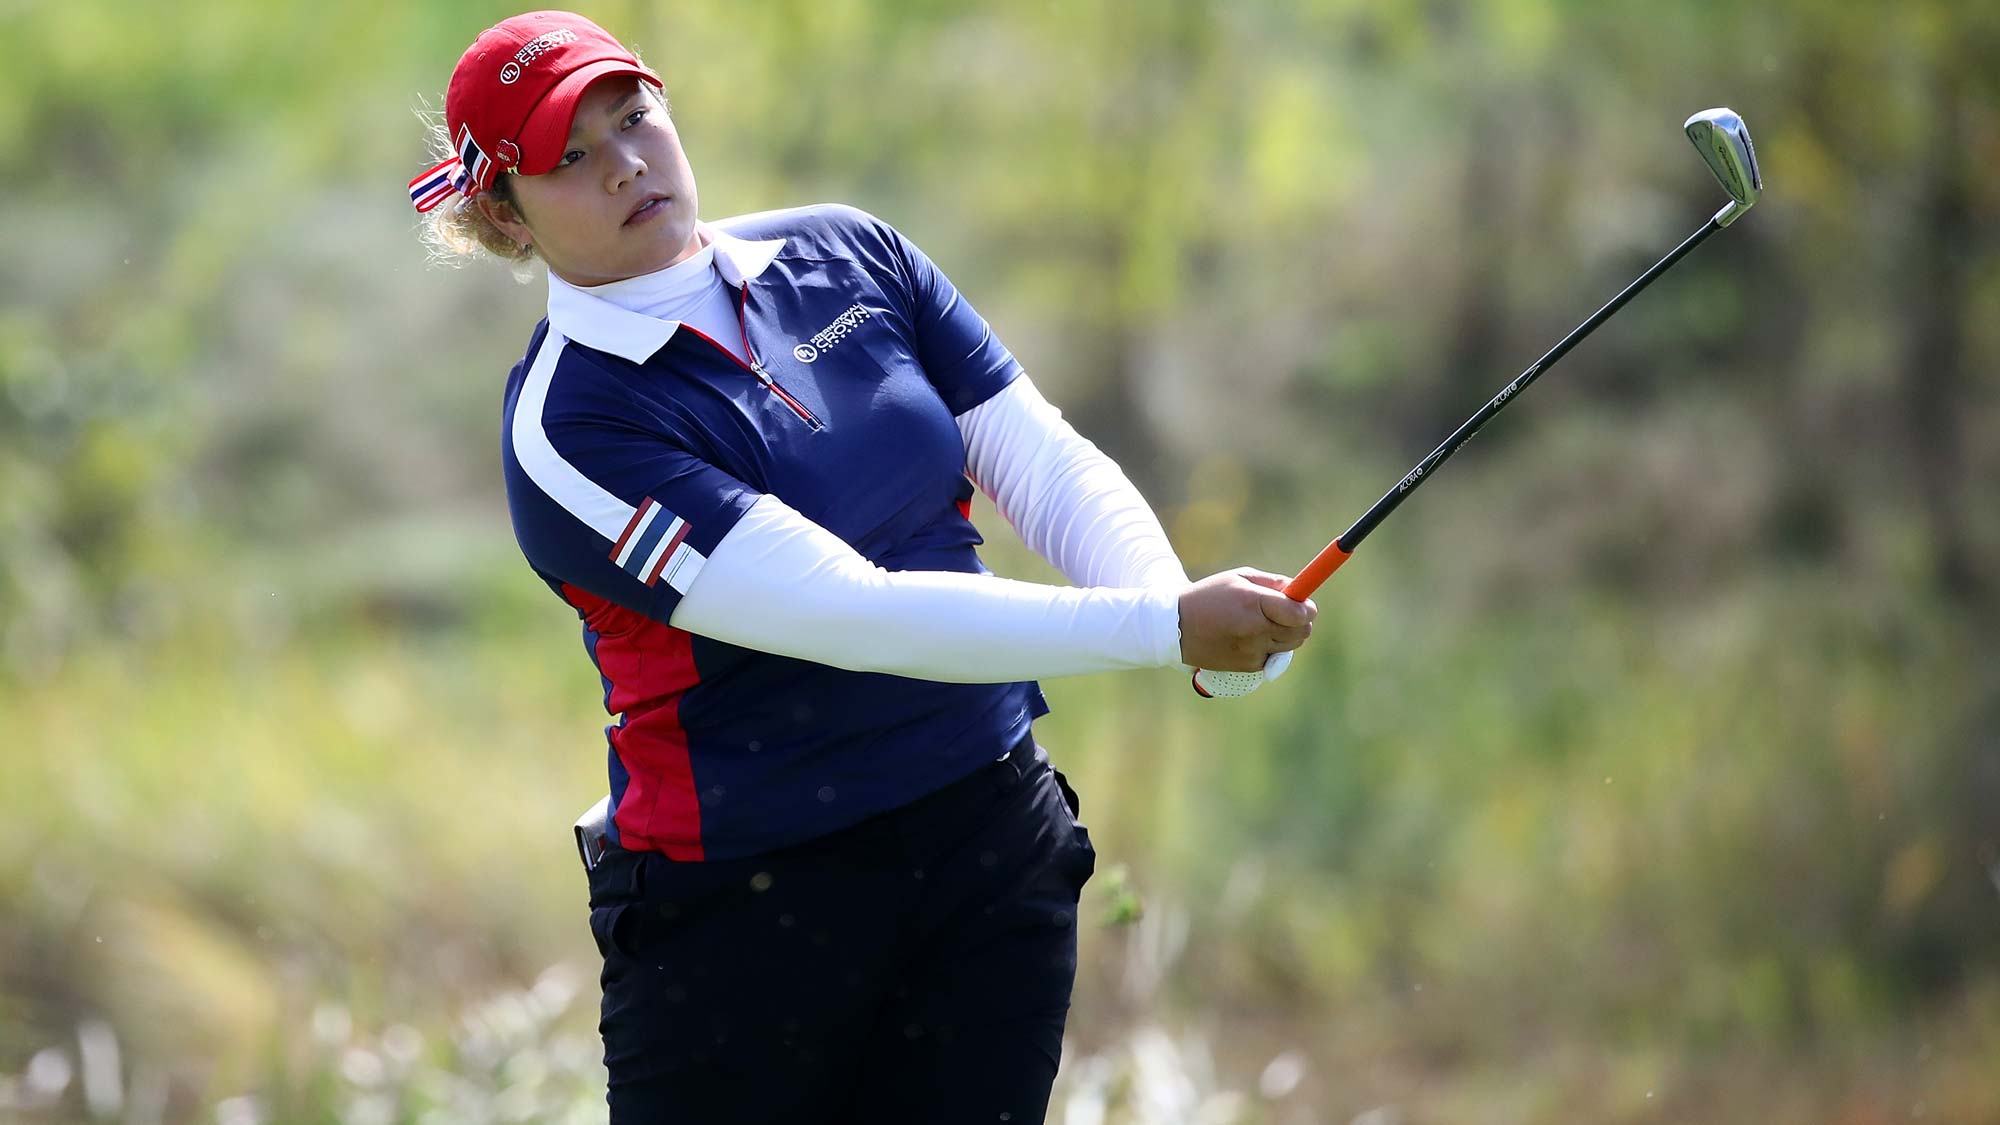 Ariya Jutanugarn of Thailand hits a tee shot on the 4th hole during the Singles match against Sung Hyun Park of South Korea on day four of the UL International Crown